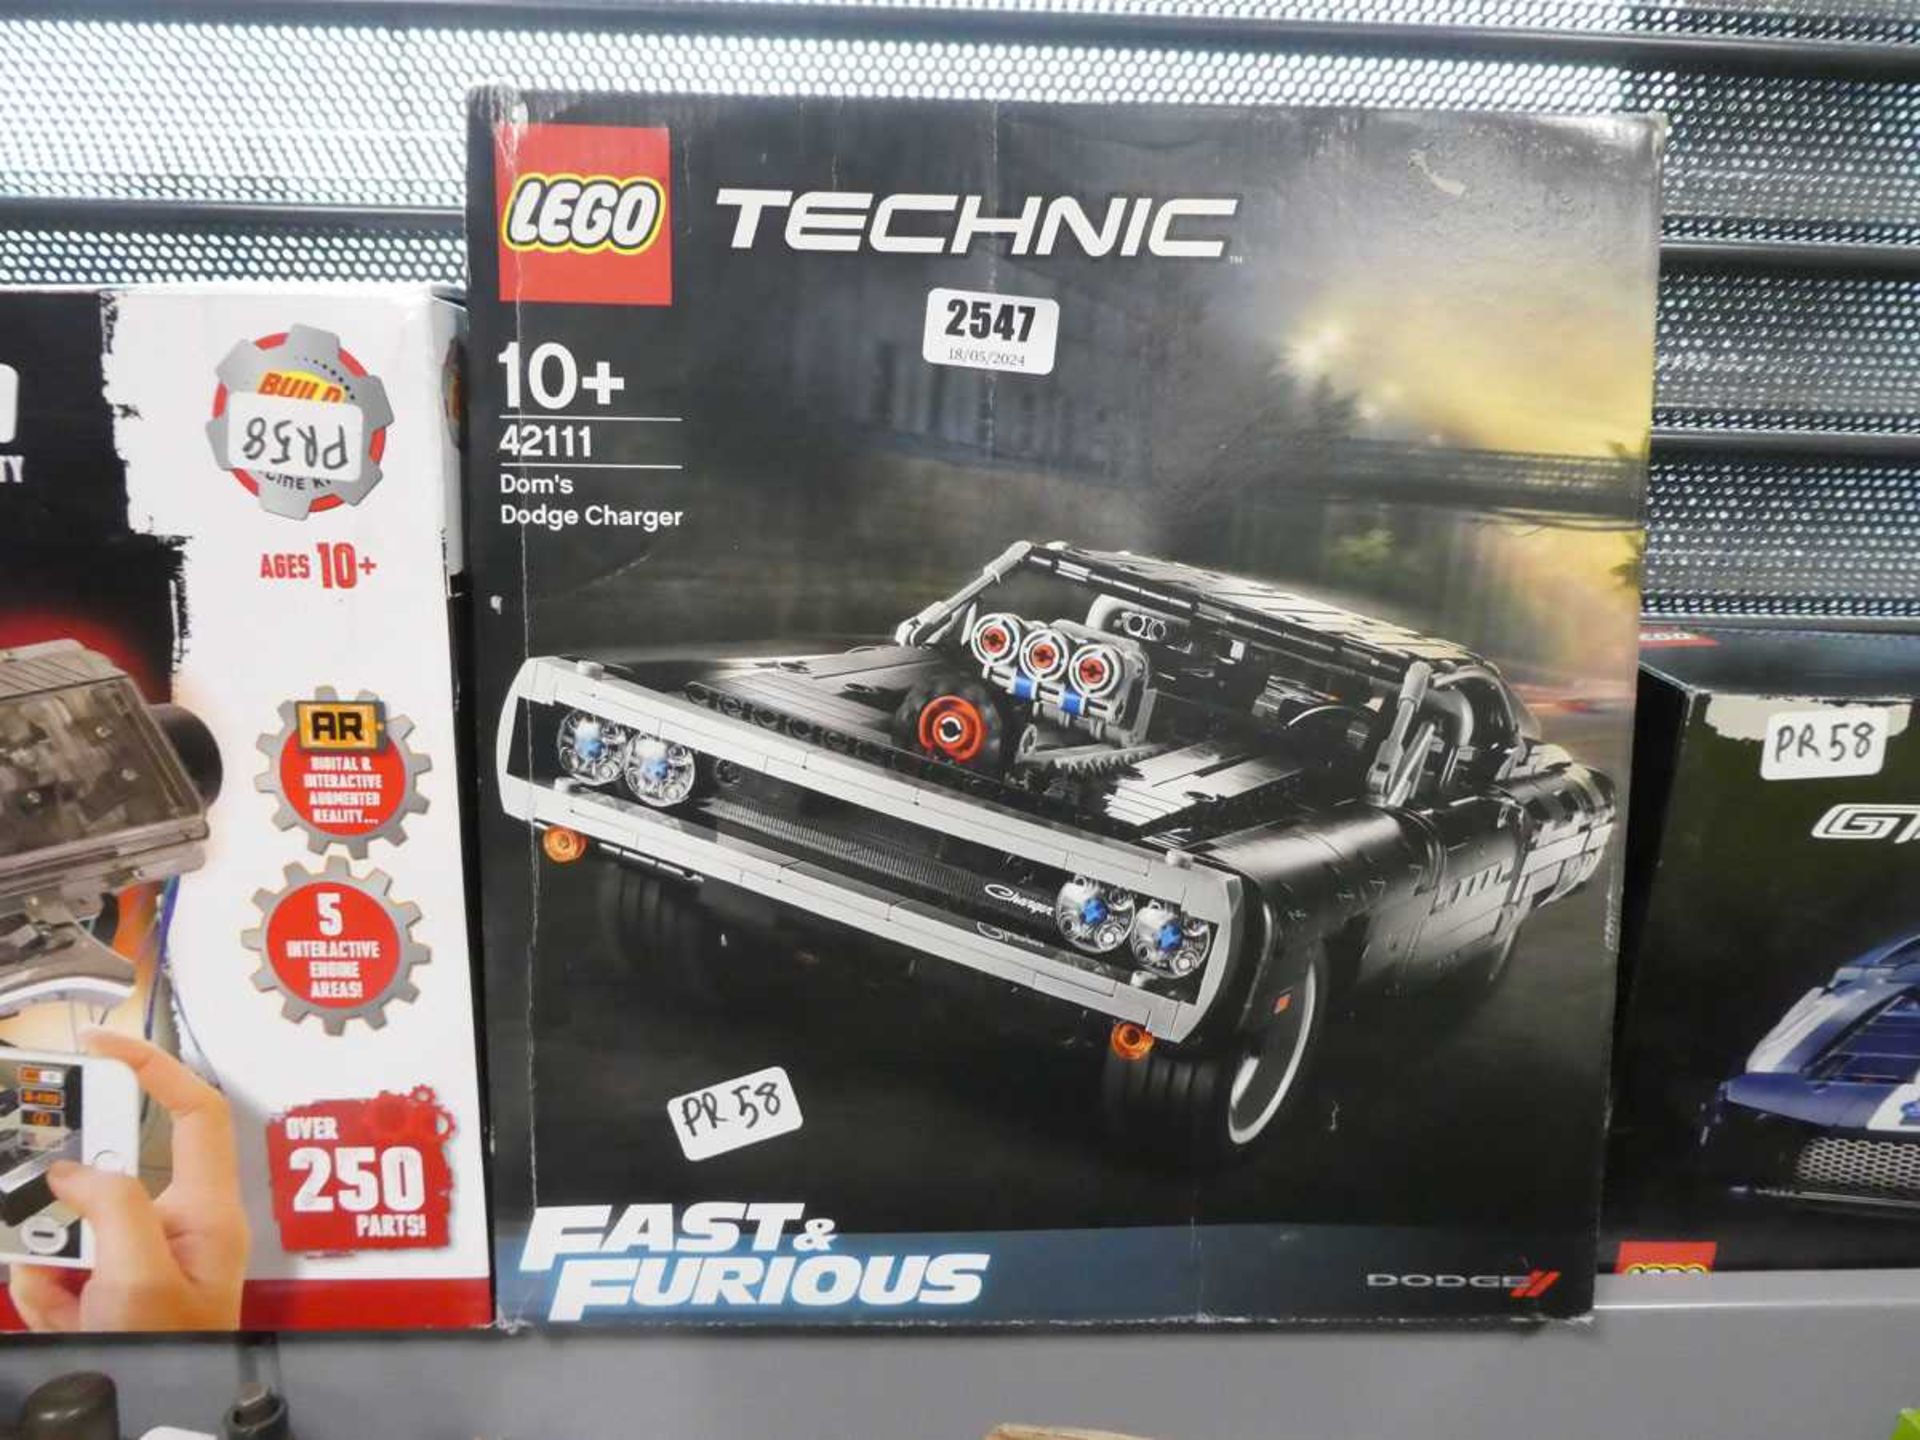 Lego Technic Fast and Furious Doms Dodge charger - model no 42111